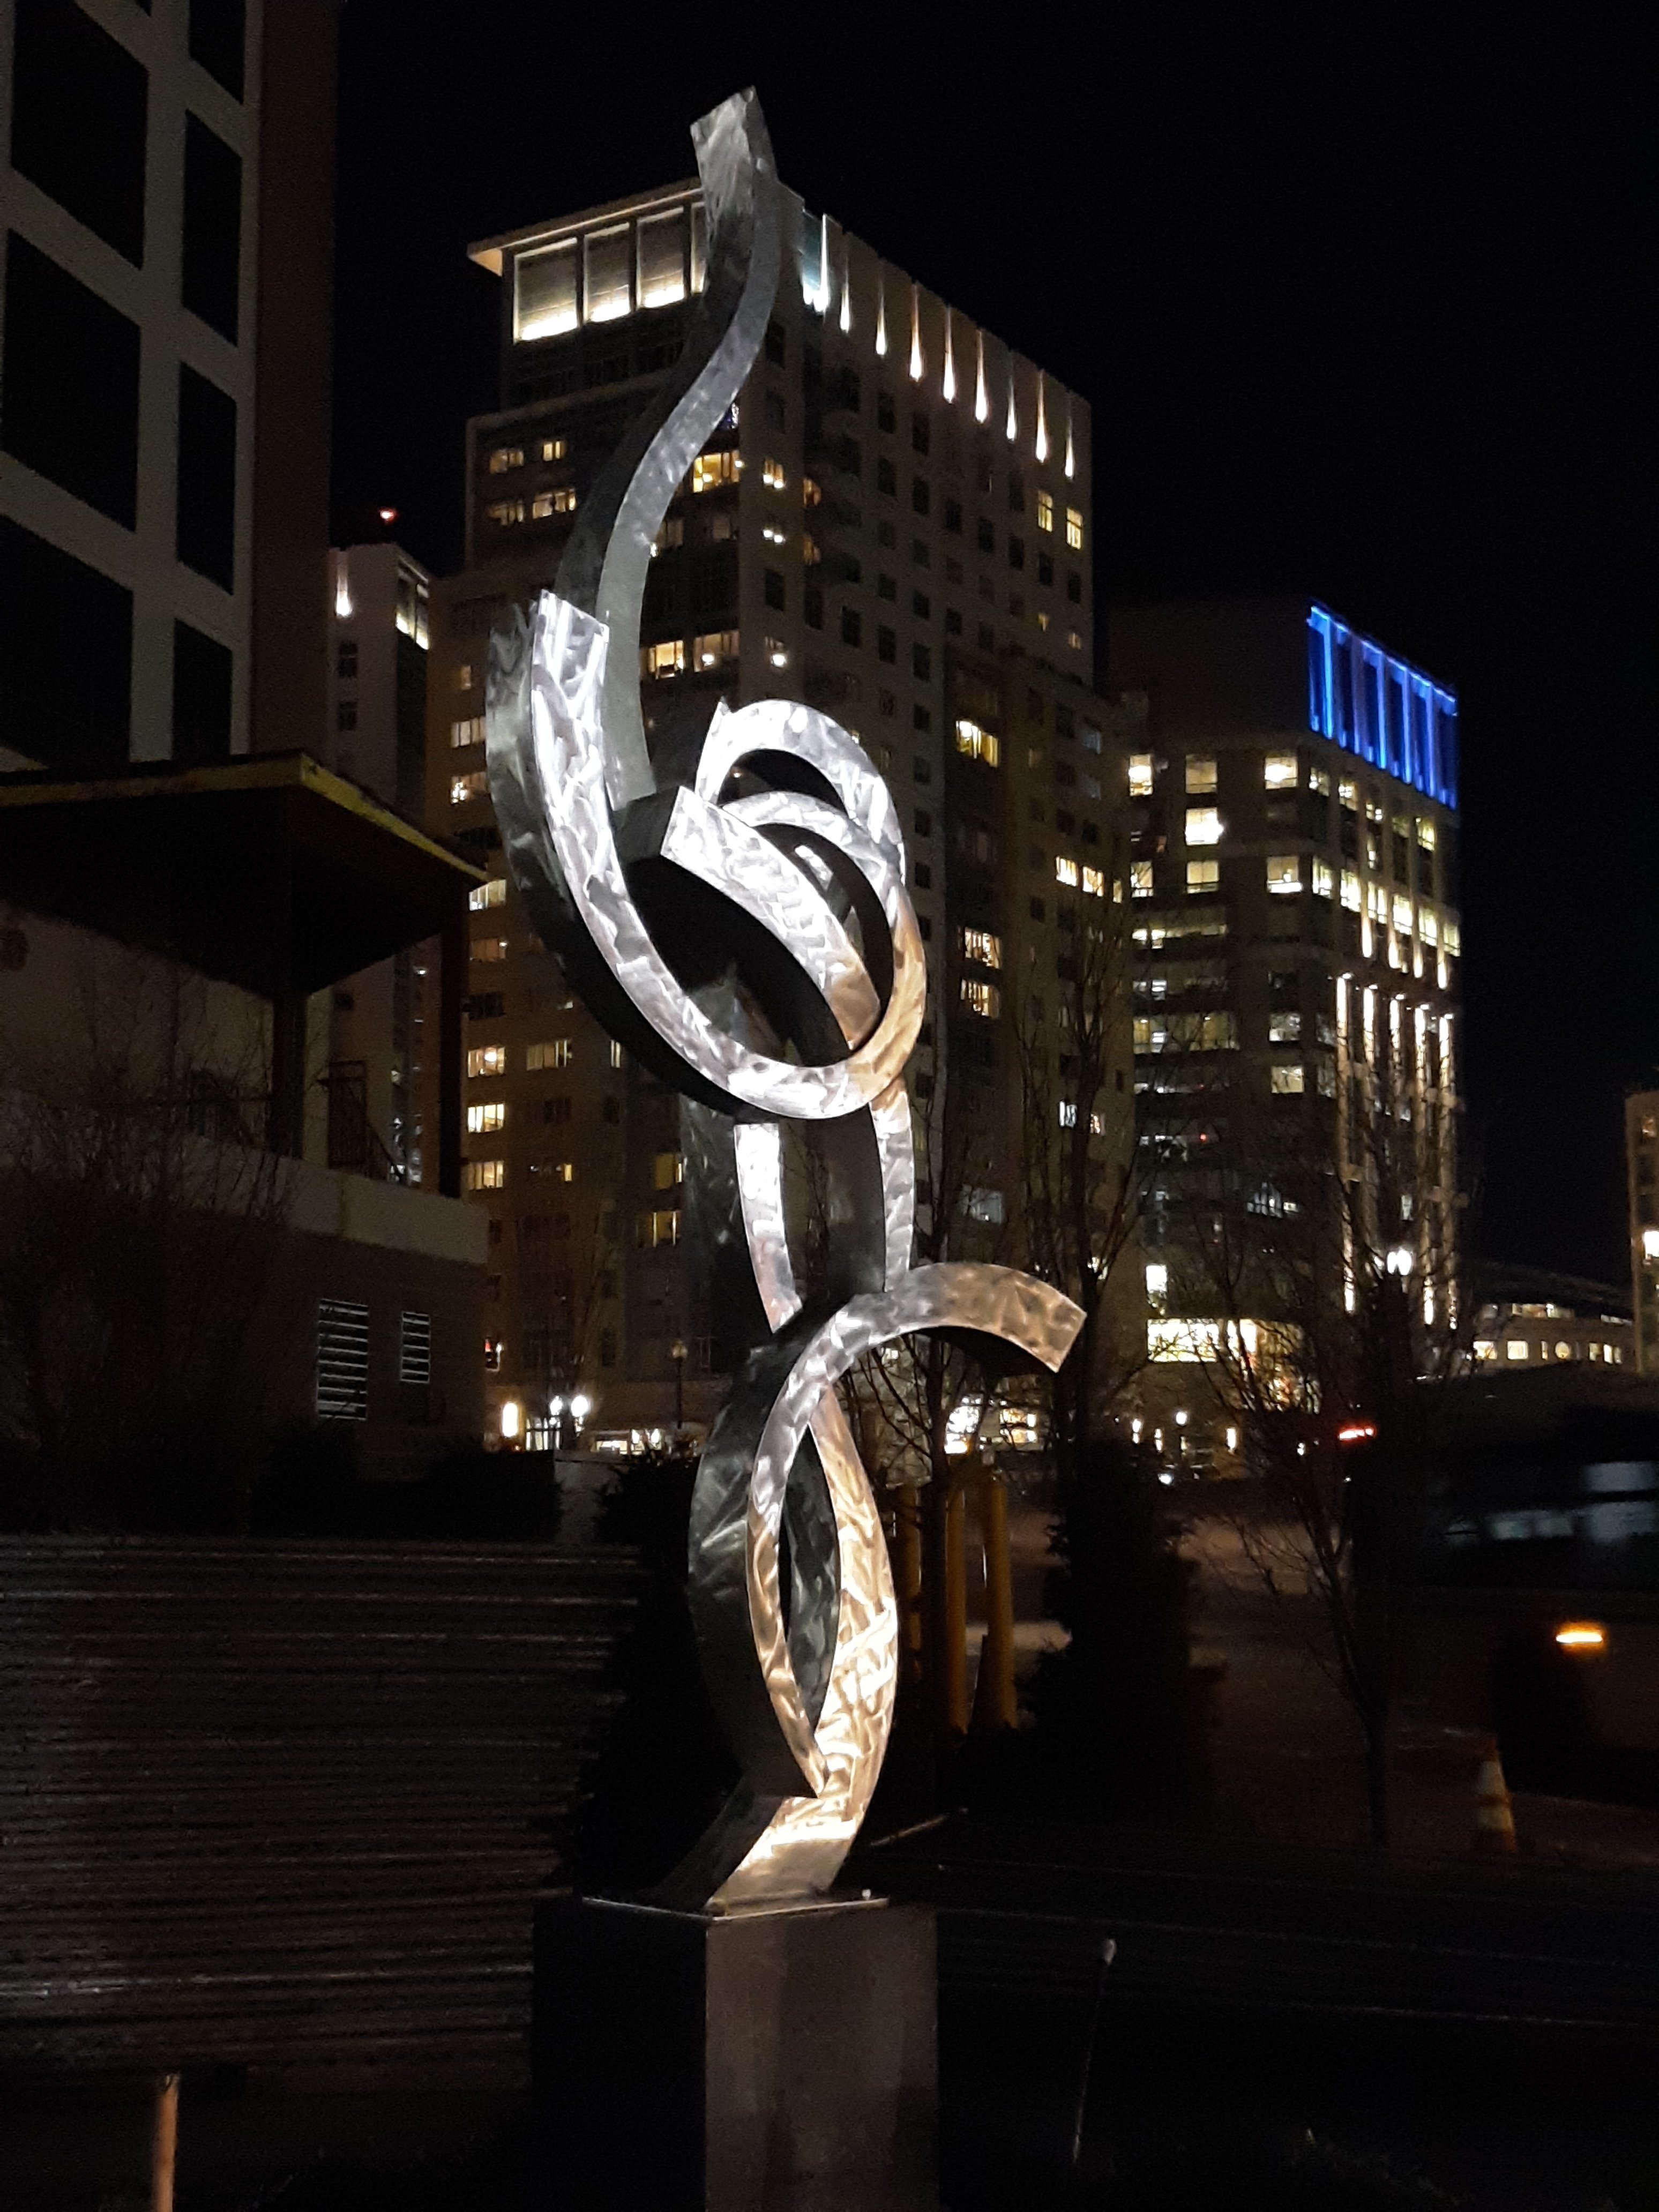 Paul Machalaba; Elevation III Commission, 2019, Original Sculpture Aluminum, 4 x 13 feet. Artwork description: 241 13 foot polished fluid abstract commissions available for corporate or residential spaces.  Projects can be designed and built in a similar style to your exact wishes. ...